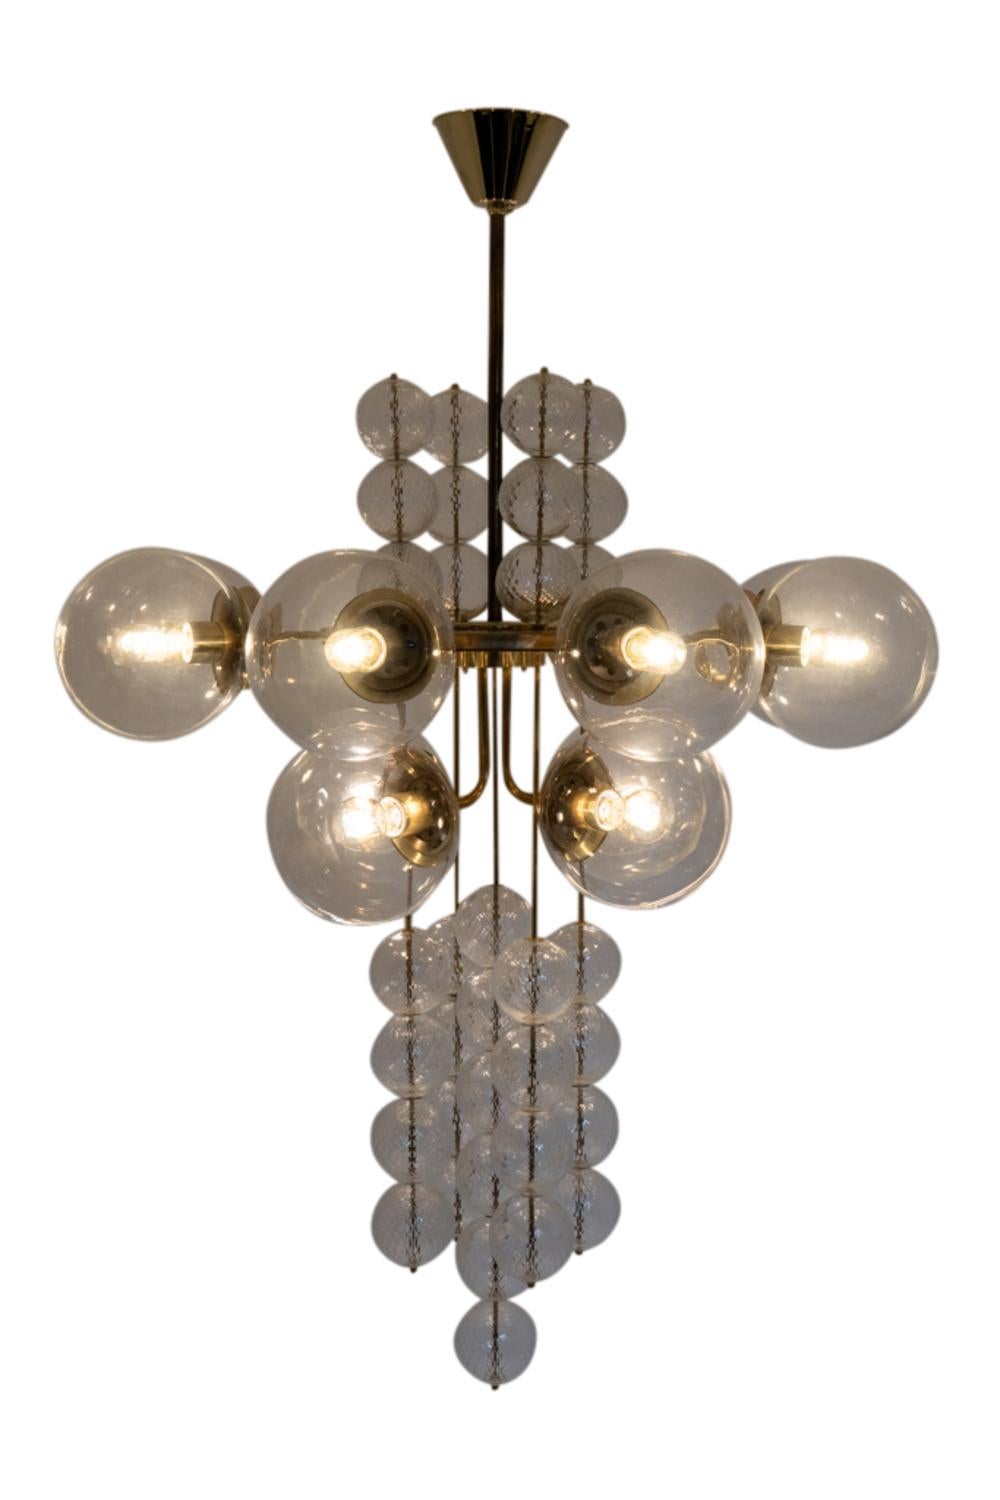 Large chandelier – or suspension – decorated with spheres, with ten arms of light. Blown glass balls, transparent for the ten light arms and with a grid decoration for the decorative ones. Gilded brass frame.

Czechoslovakian work realized in the